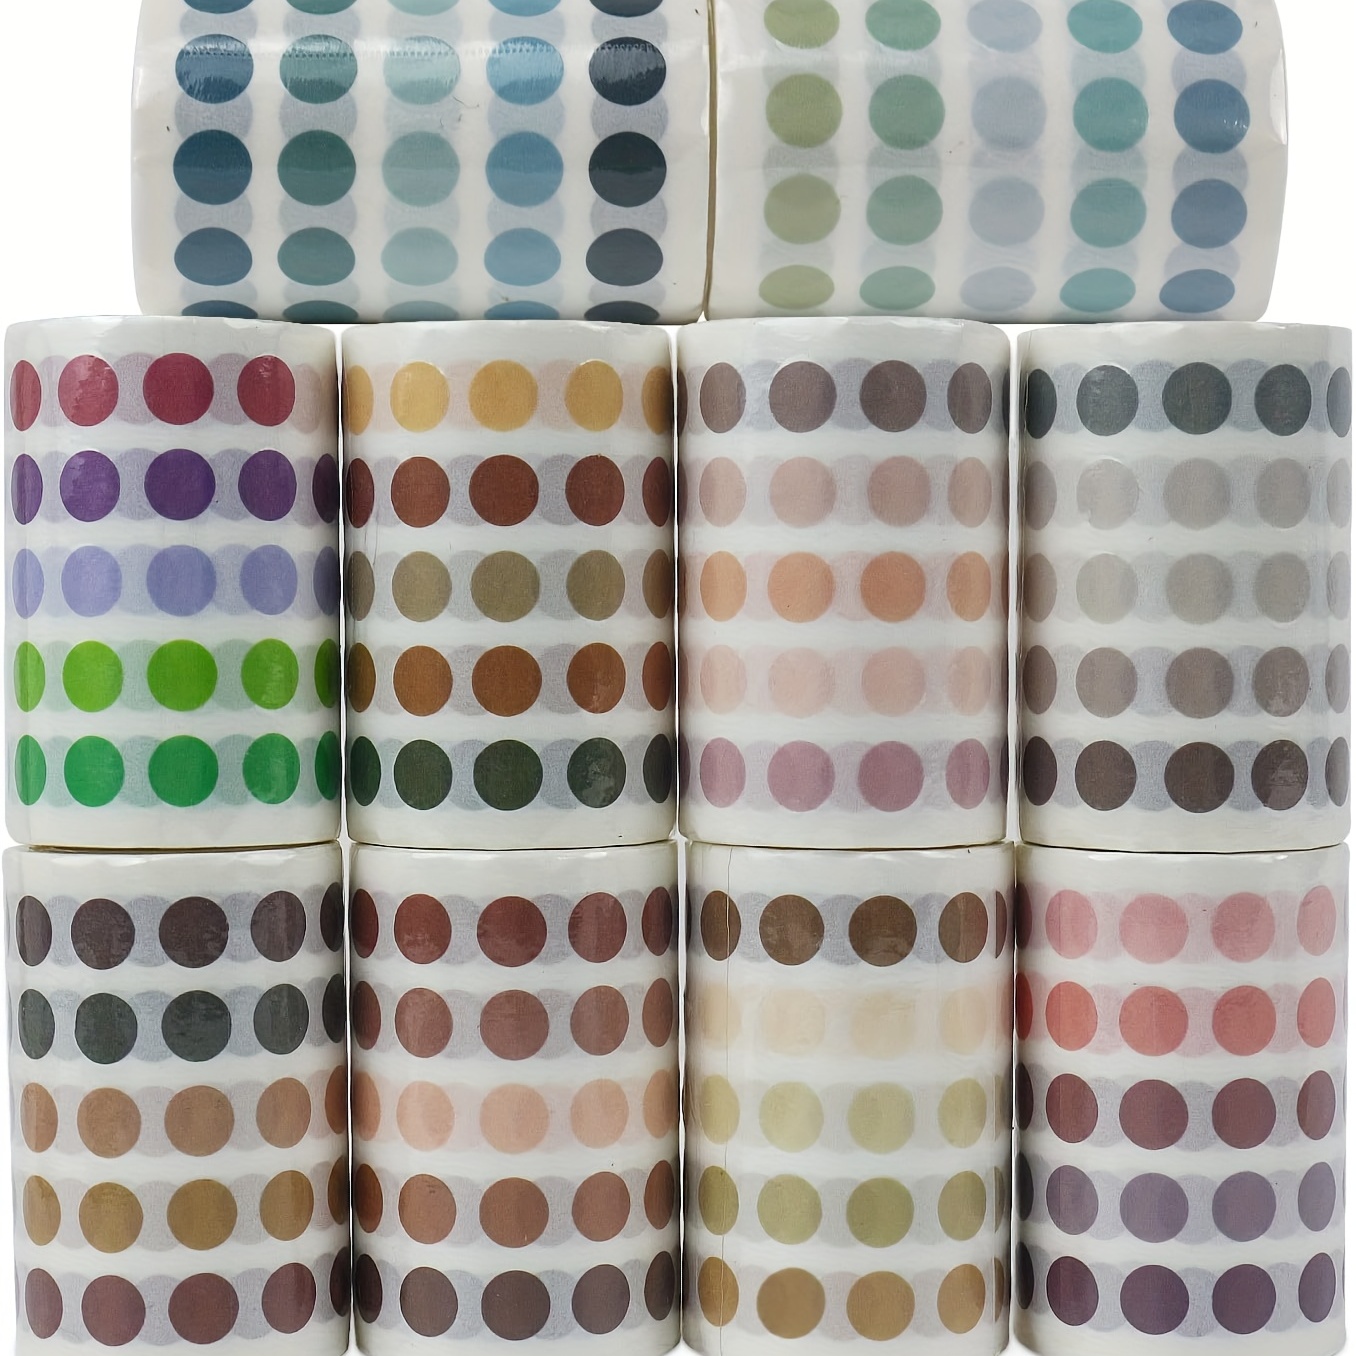 

12500pcs Color Dot Stickers For Planner, 1/3"in Circle Labels Stickers, Assorted Translucent Round Coding Stickers For School Office (set Of 10 Roll)